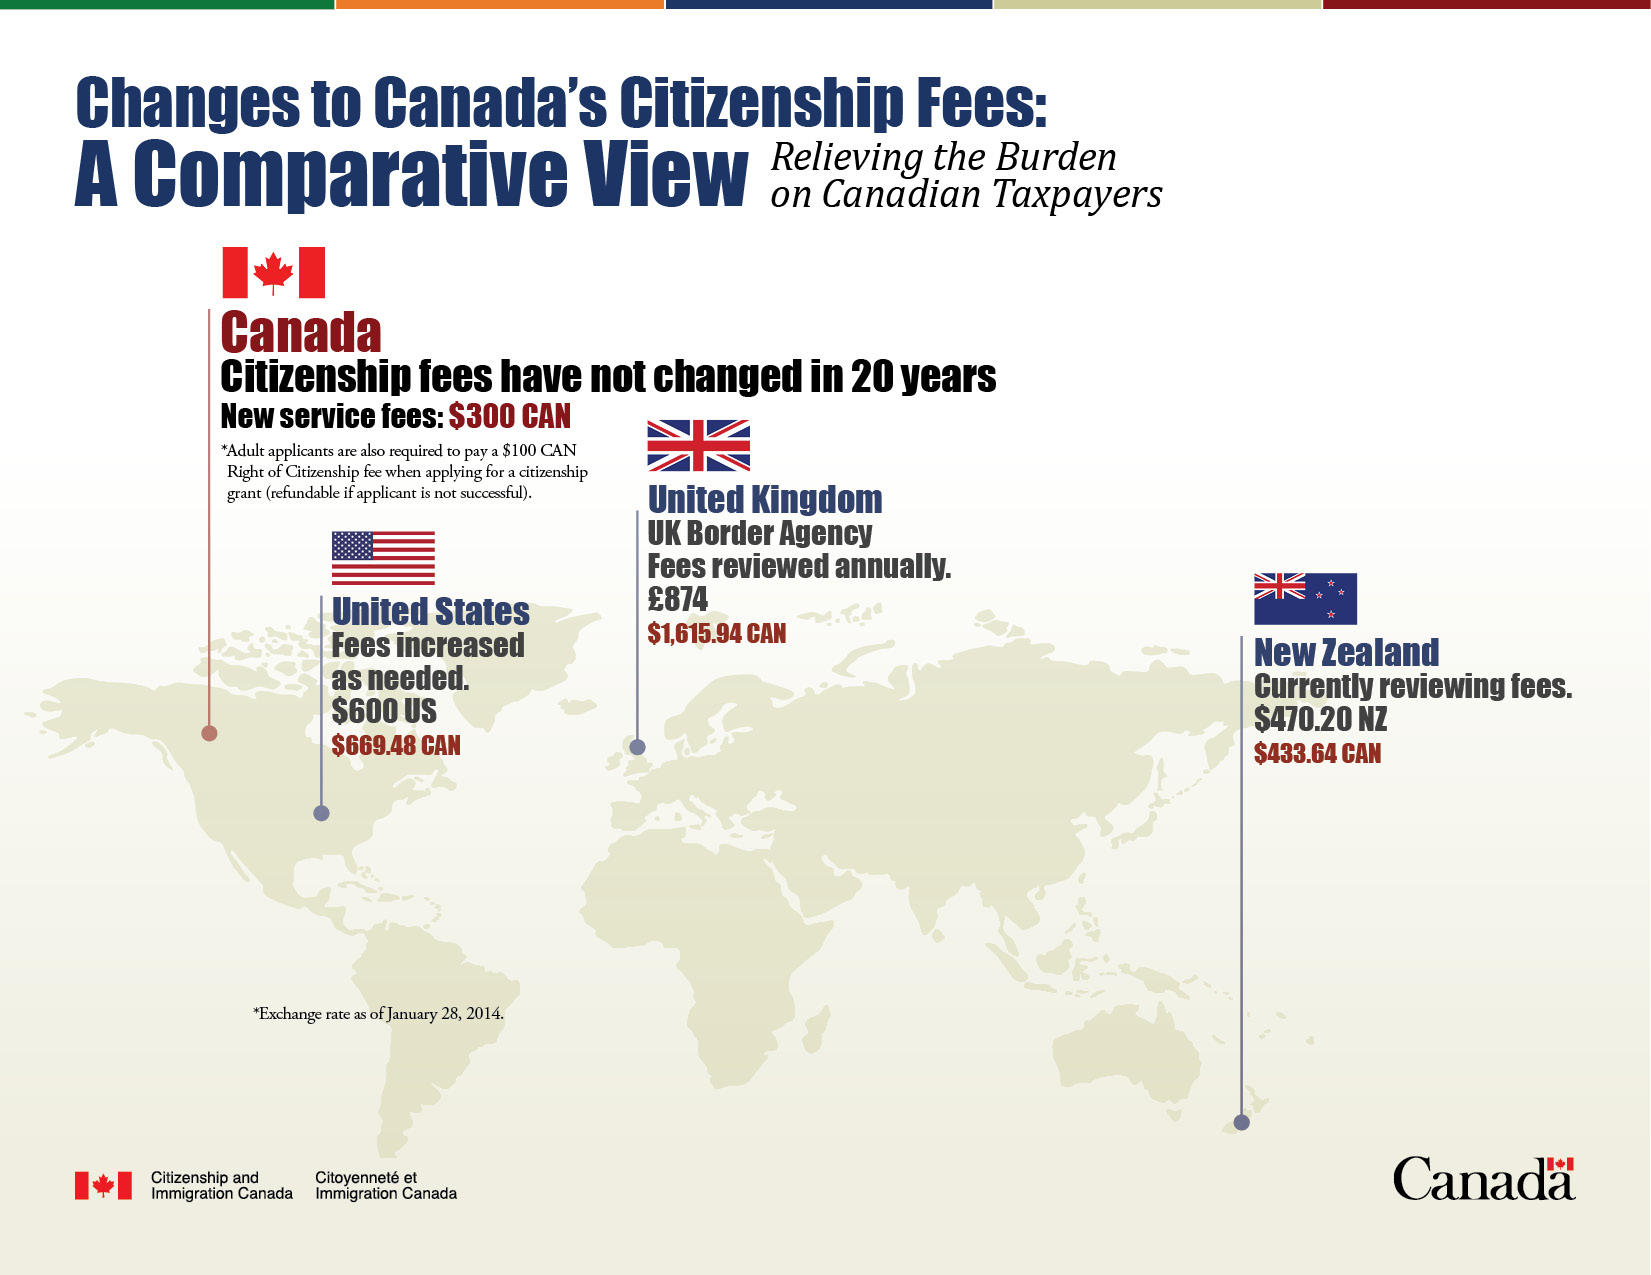 What changes have been made in the citizenship fees in Canada? - All that you need to know about reduced citizenship fees in Canada